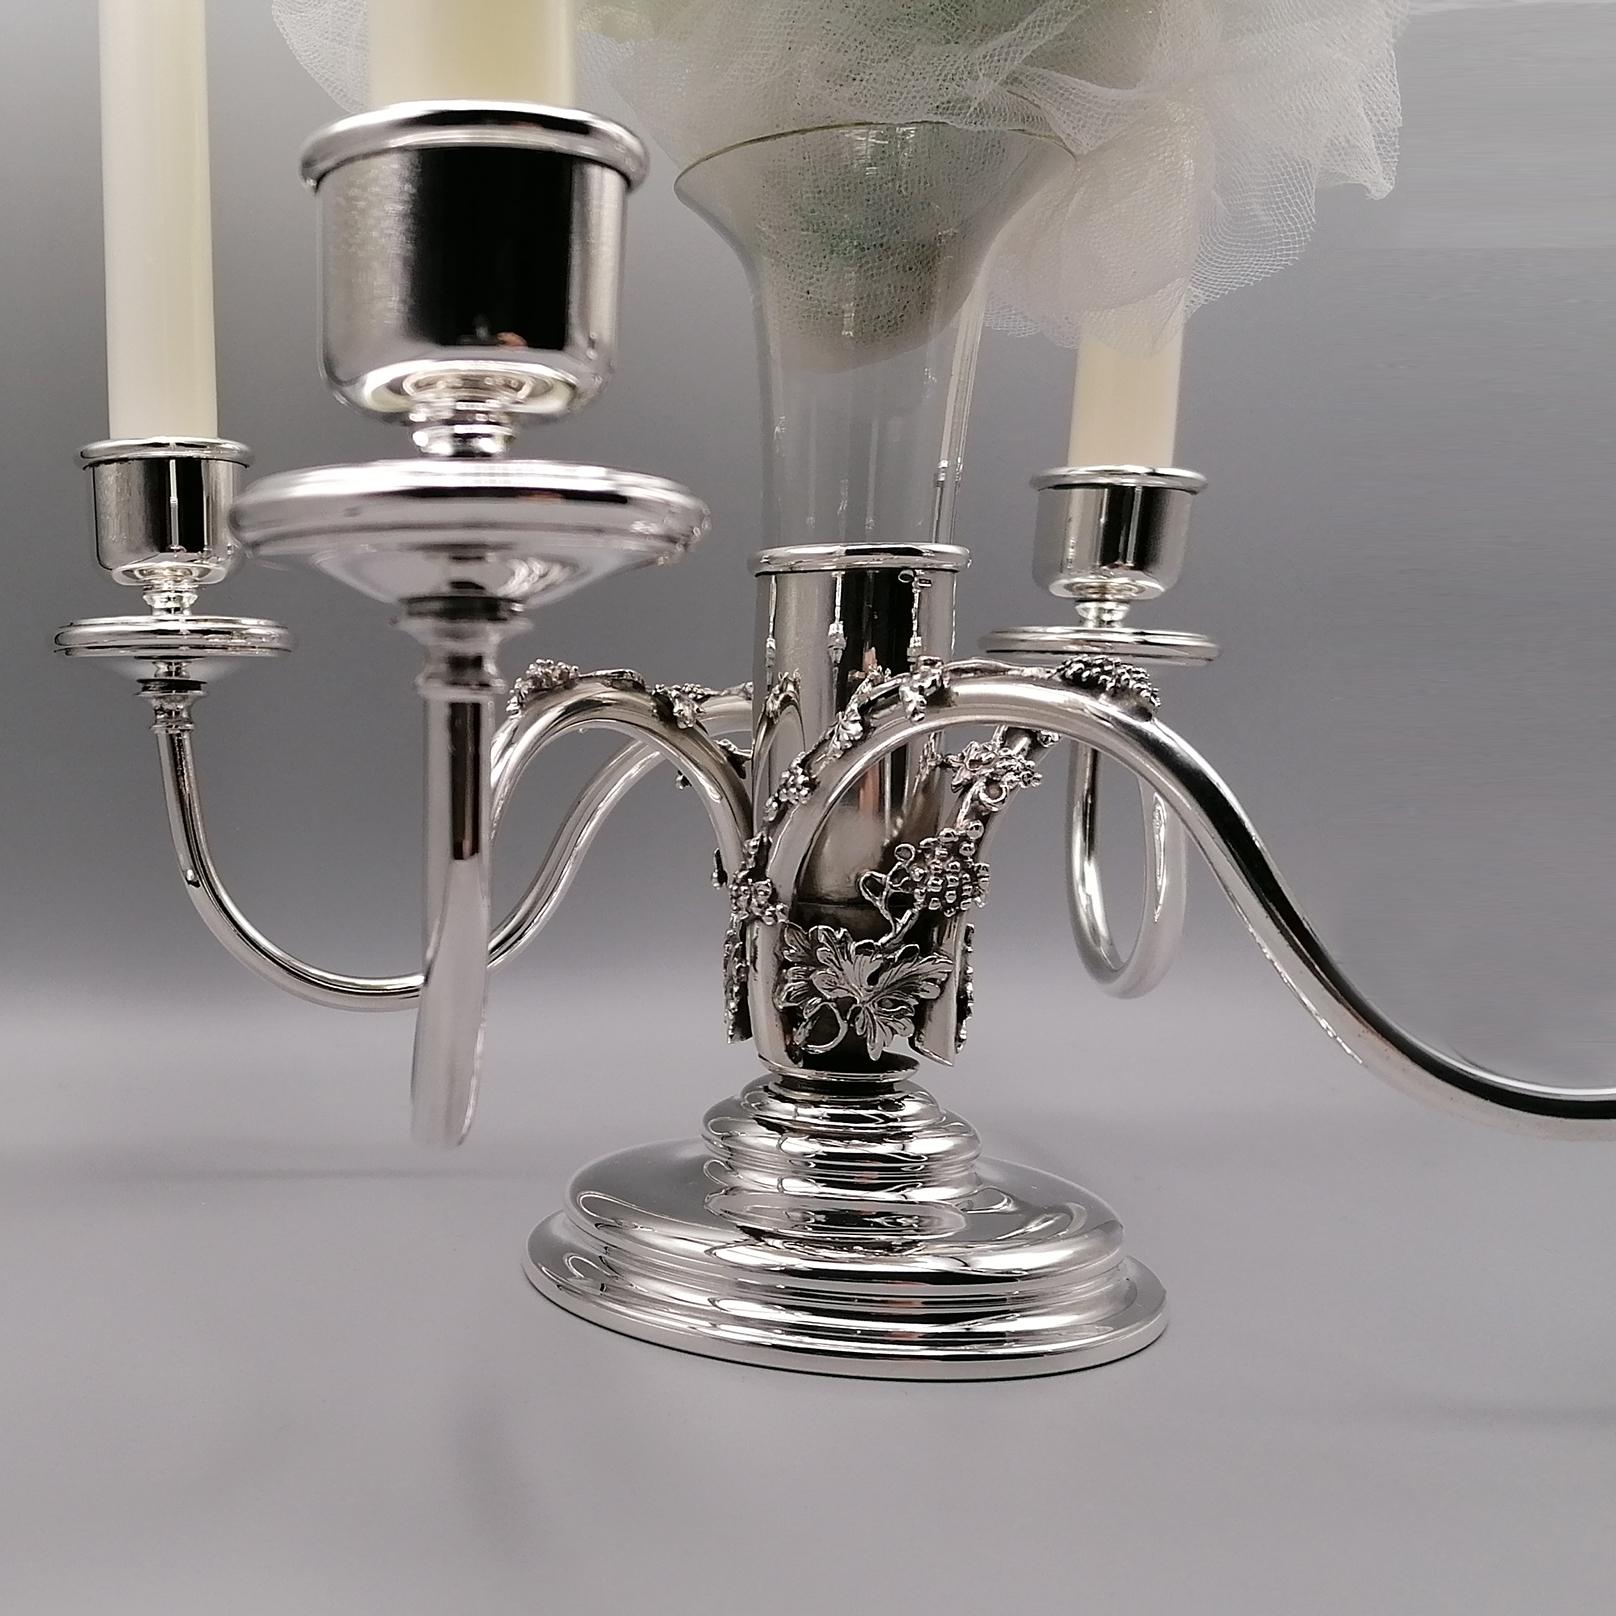 Late 20th Century 20th Century Italian 4 Light Candelabra with Flower Holder For Sale